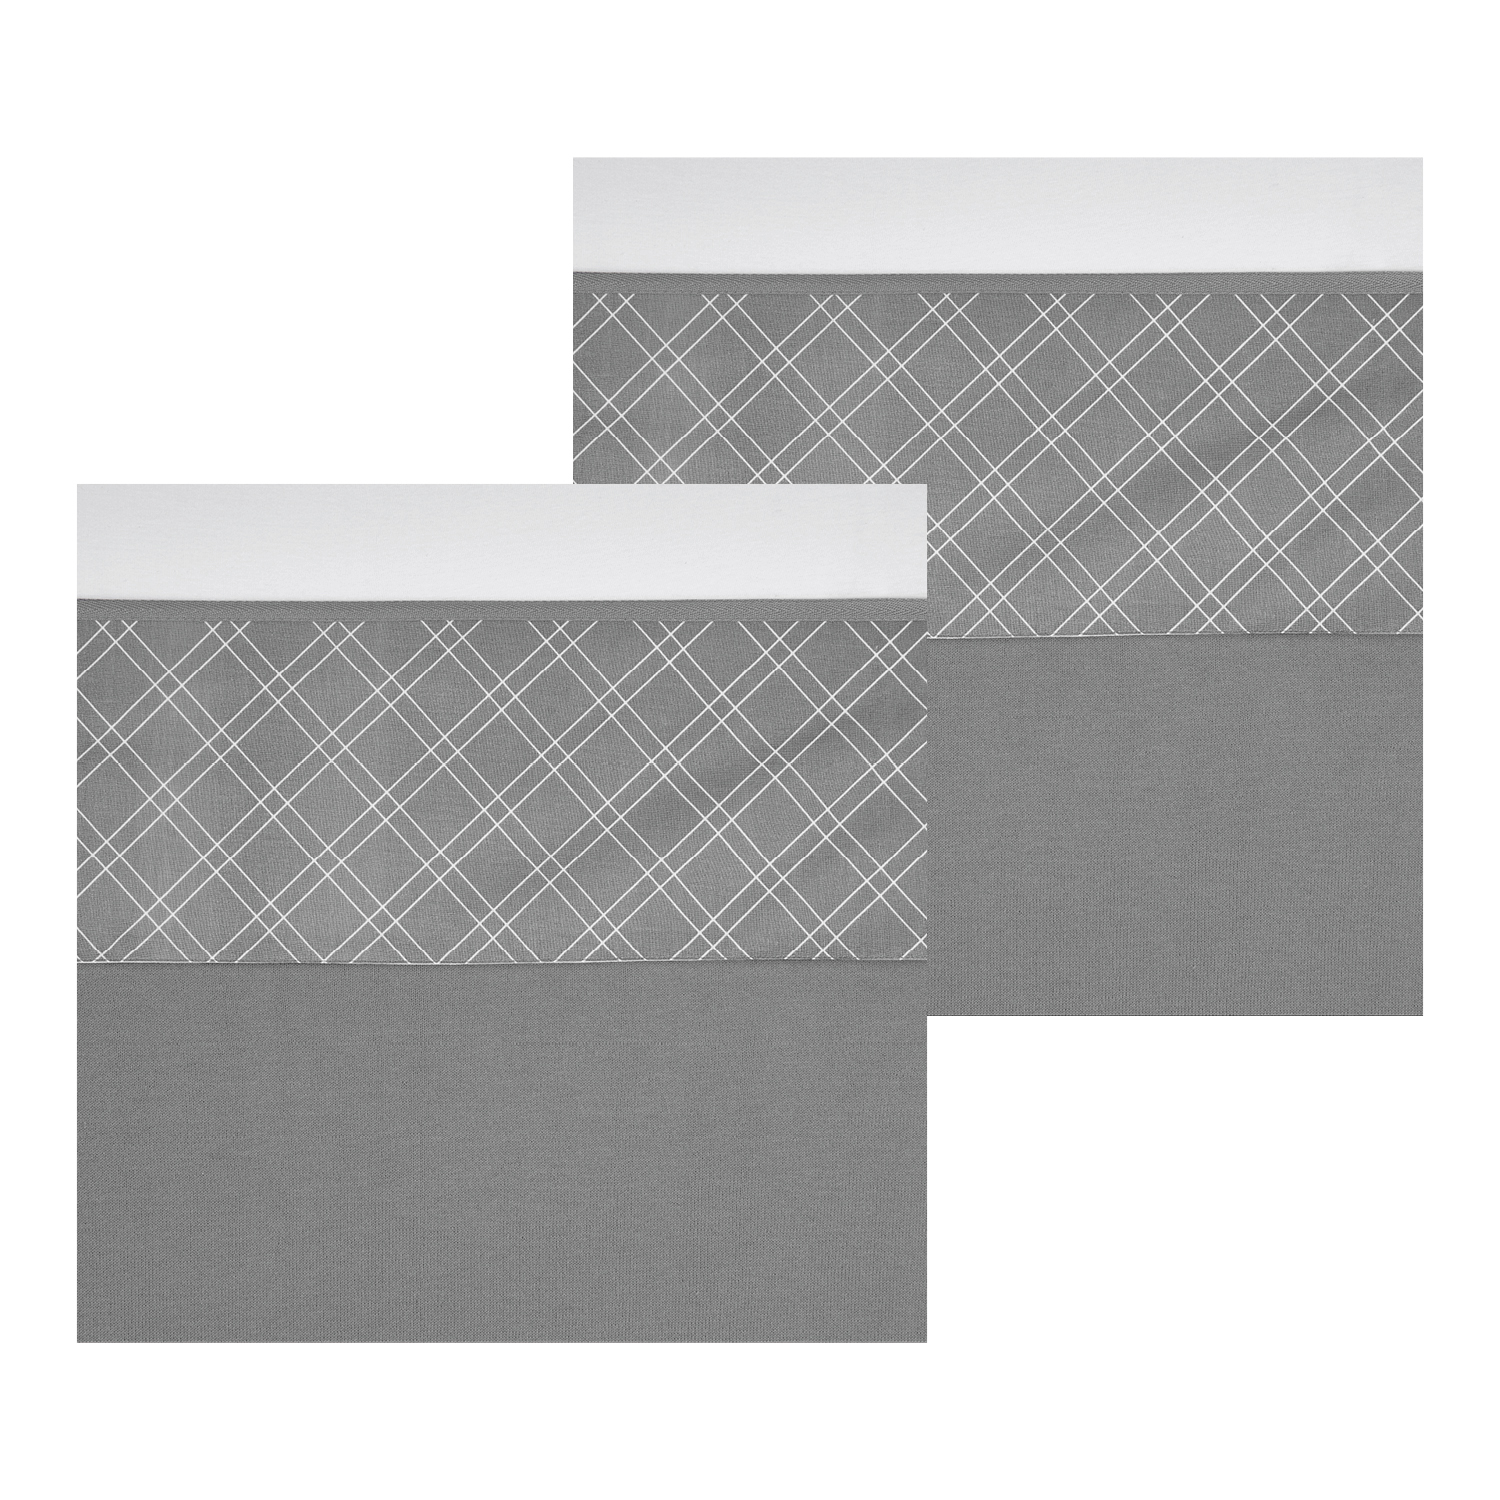 Cot bed sheet 2-pack Double Diamond - grey - 100x150cm